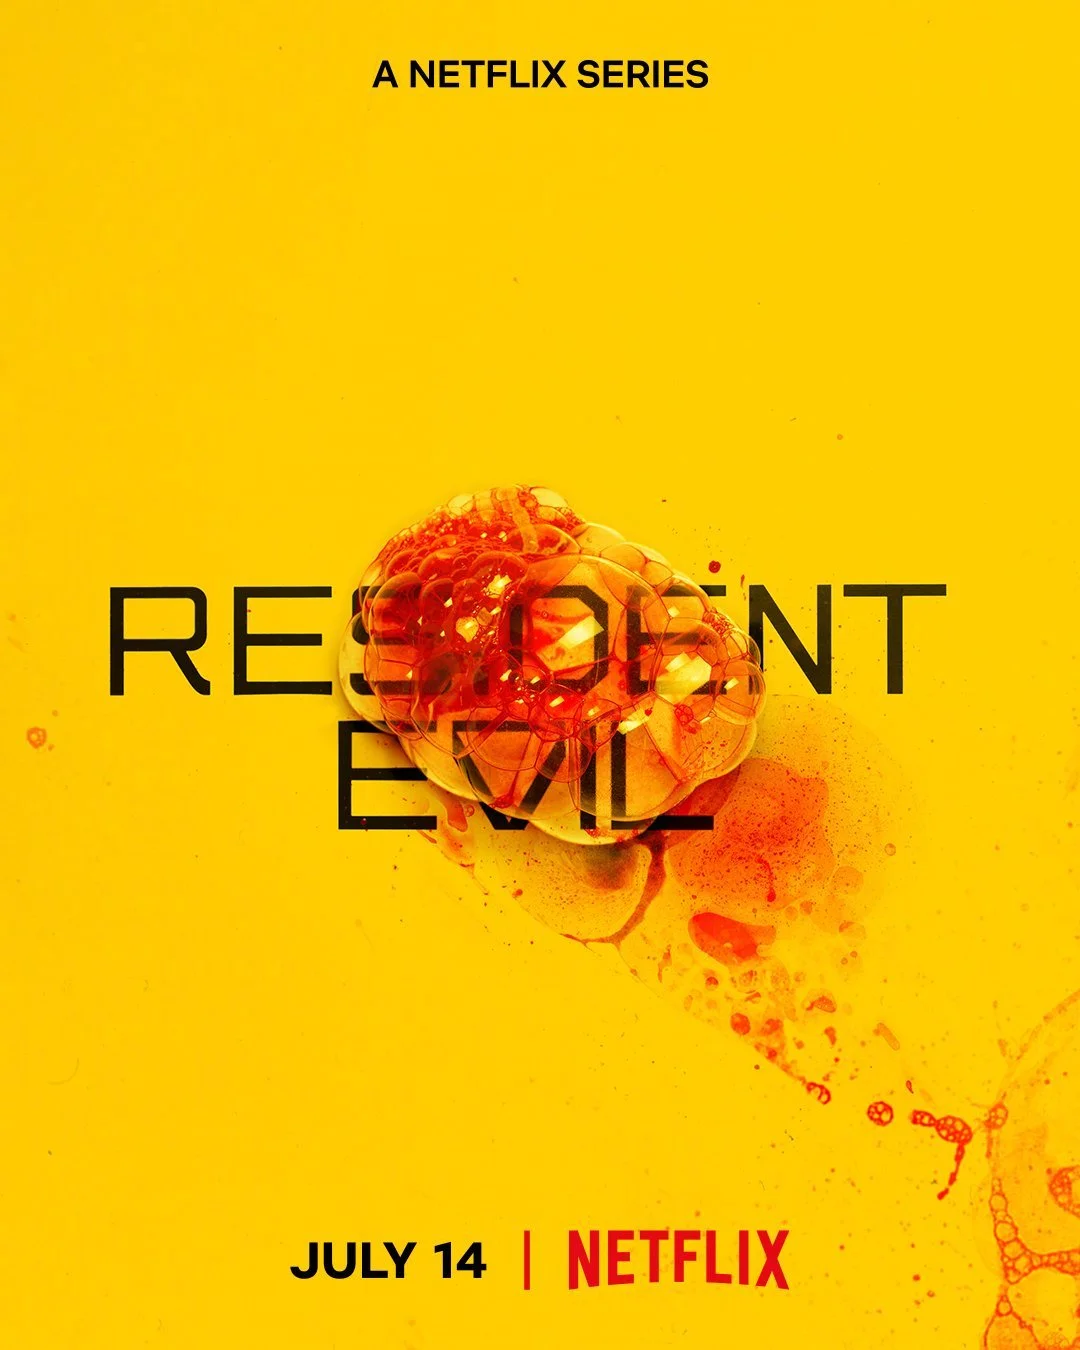 Netflix's live-action series of 'Resident Evil' releases posters, it will go live on July 14 this year